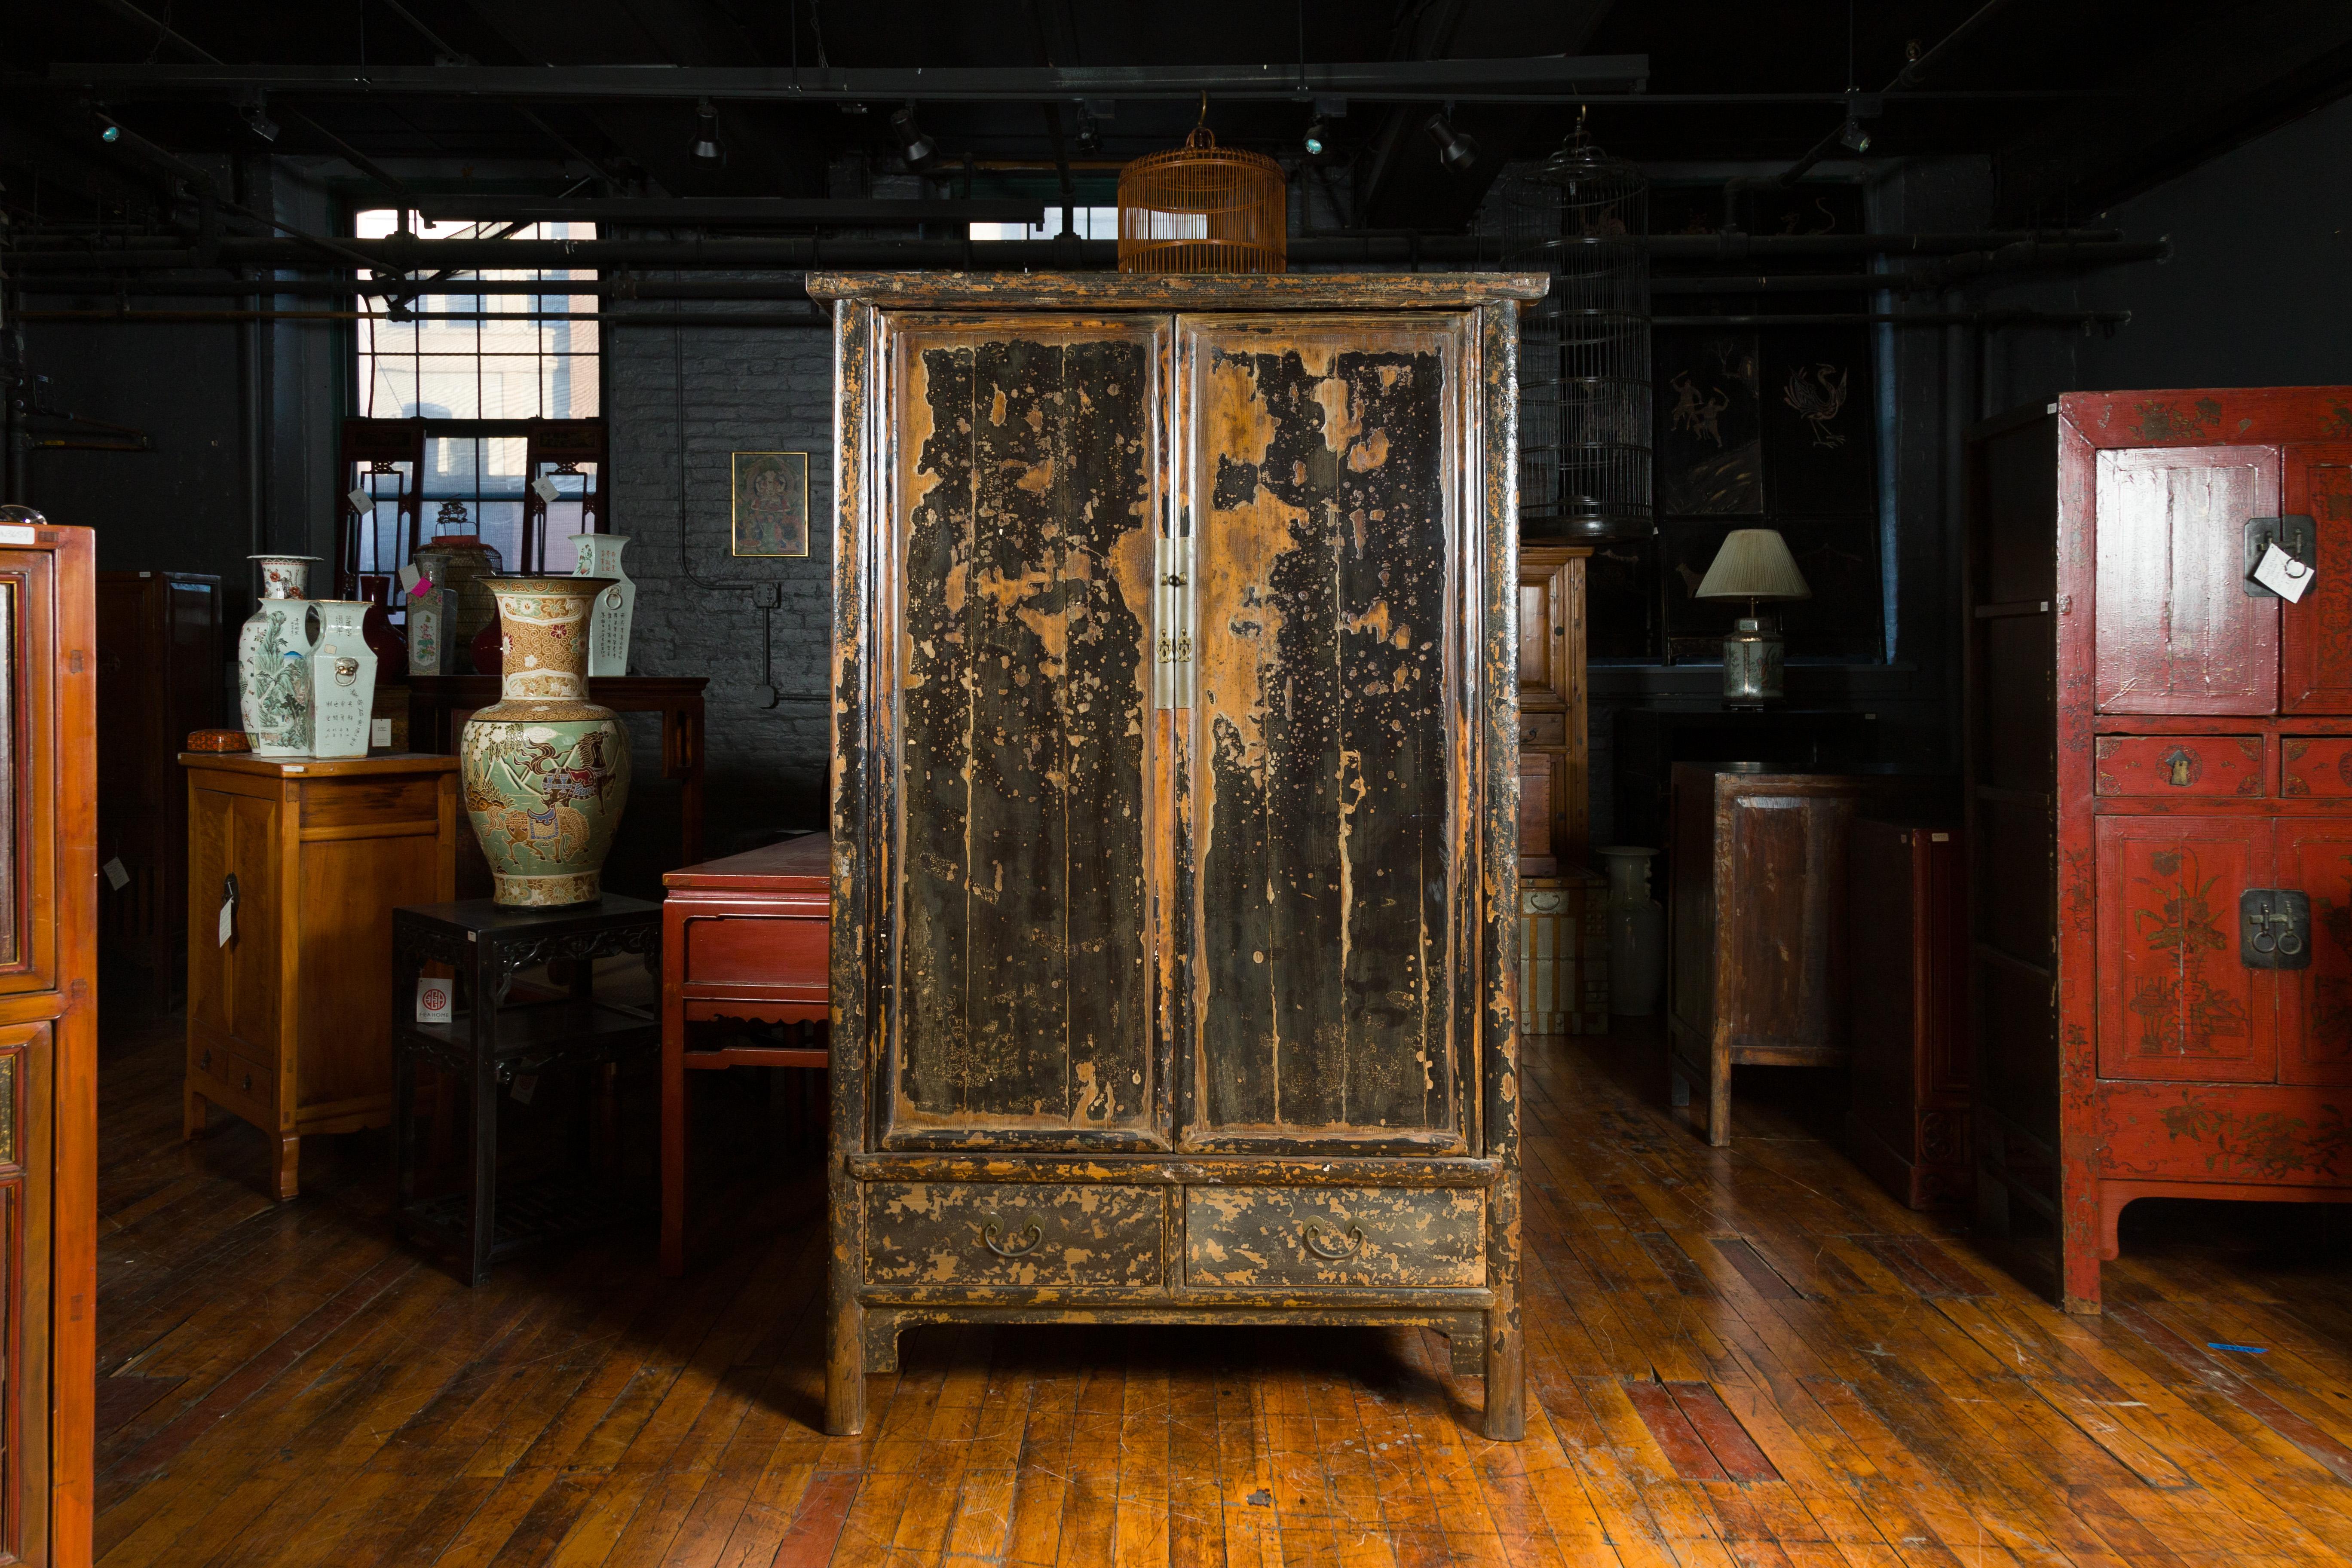 A Chinese Qing Dynasty period black lacquered cabinet from the 19th century, with original finish, doors and drawers. Crafted during the Qing Dynasty in the 19th century, this authentic Chinese cabinet retains its original black lacquered finish,